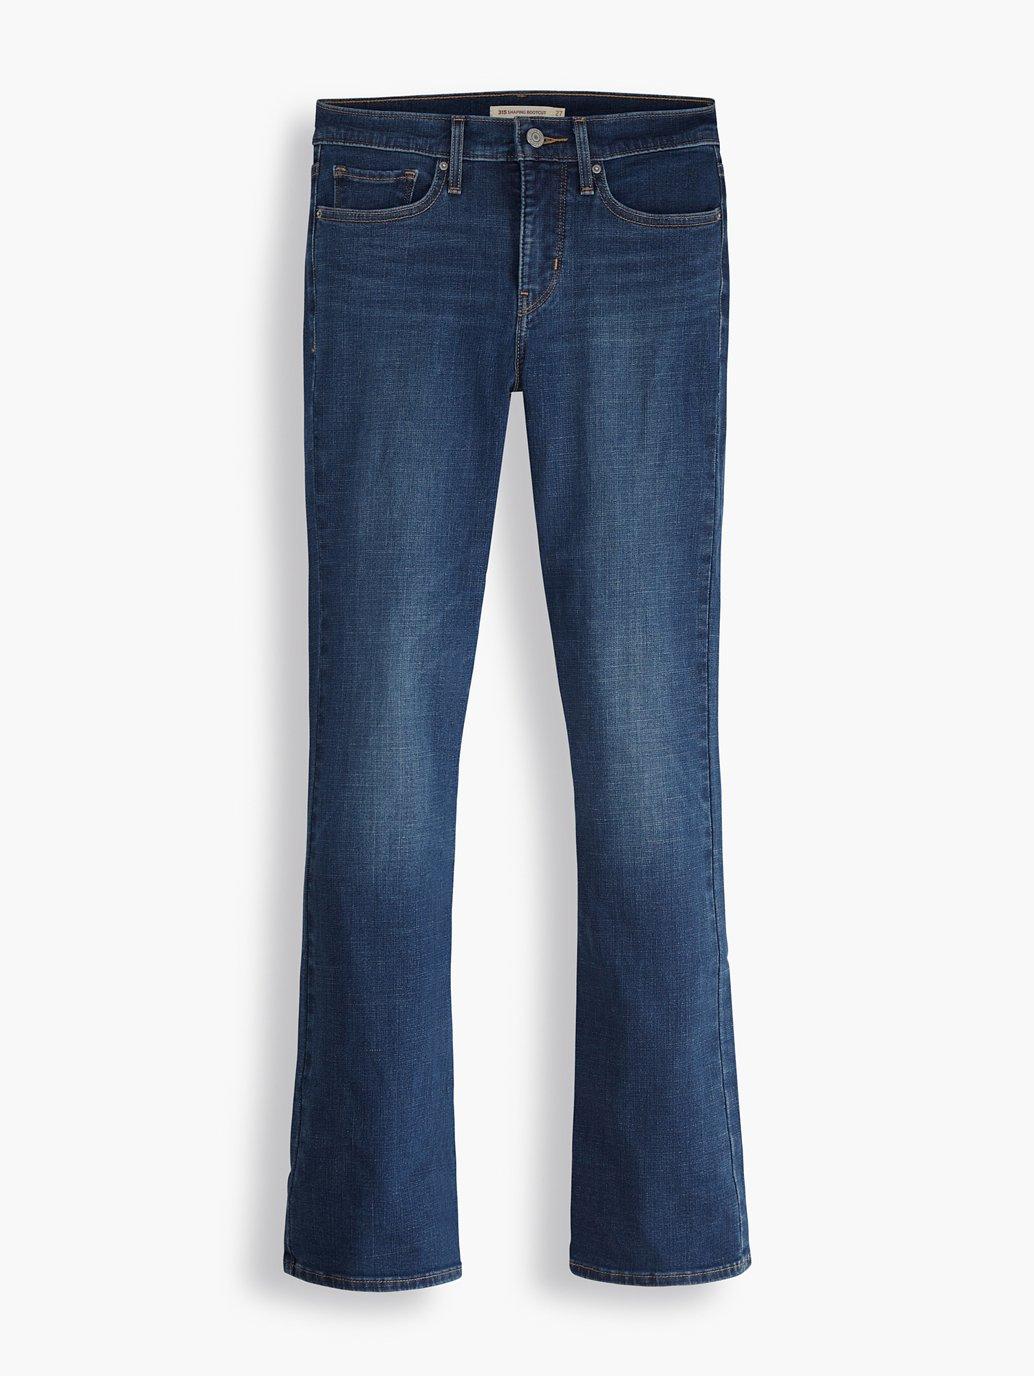 Buy Levi's® Women's 315 Shaping Boot Cut Jeans | Levi’s® Official ...